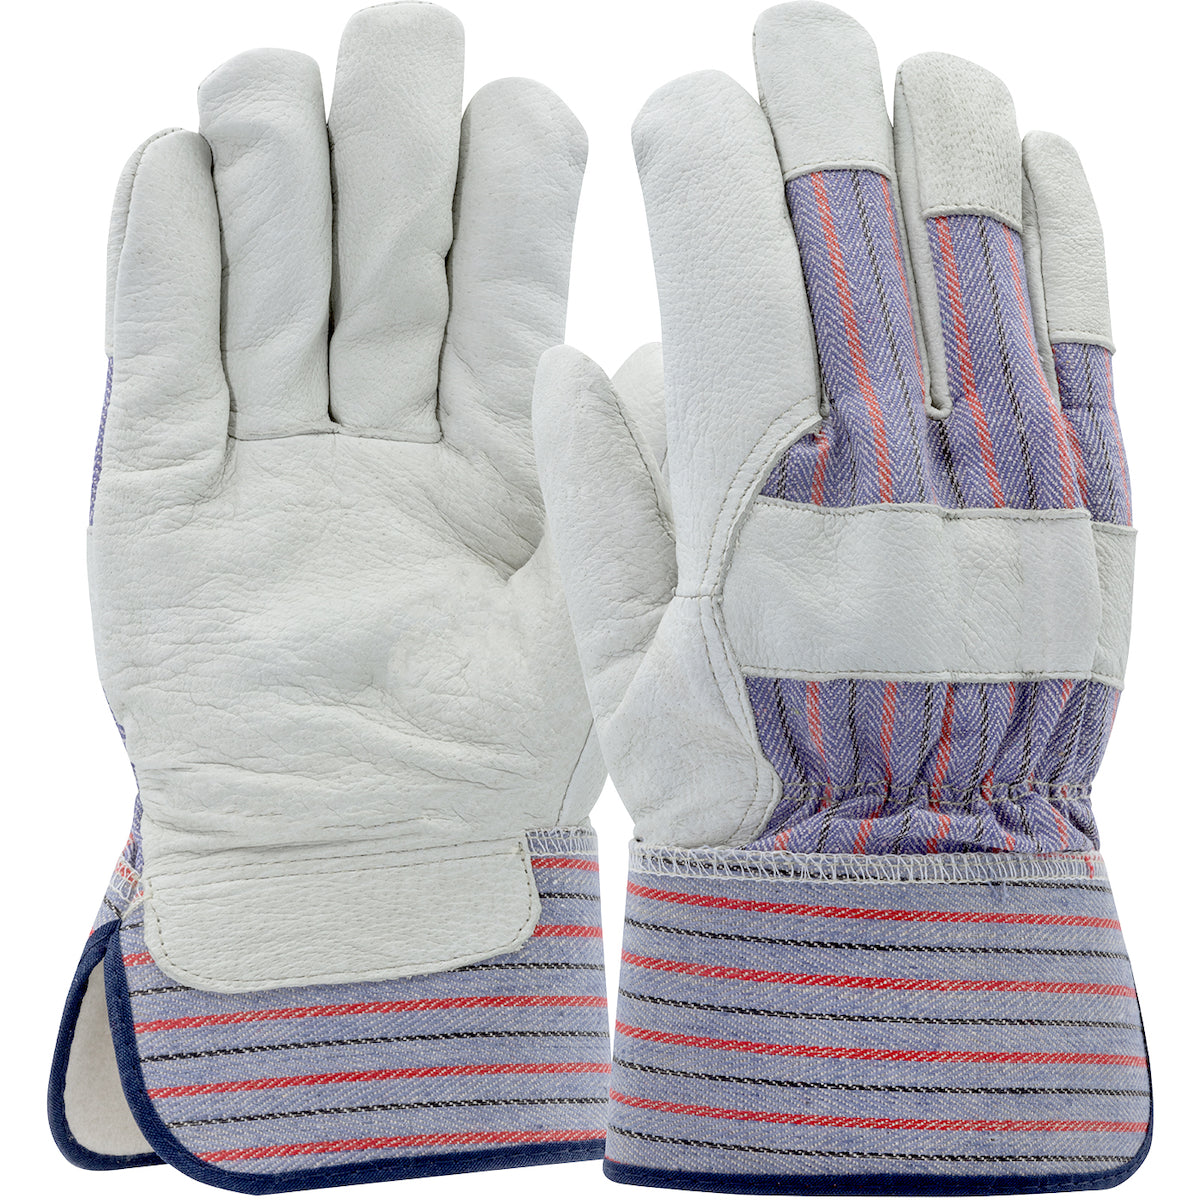 Pigskin Leather Palm Glove with Fabric Back and Winter Thermal Lining - Rubberized Safety Cuff